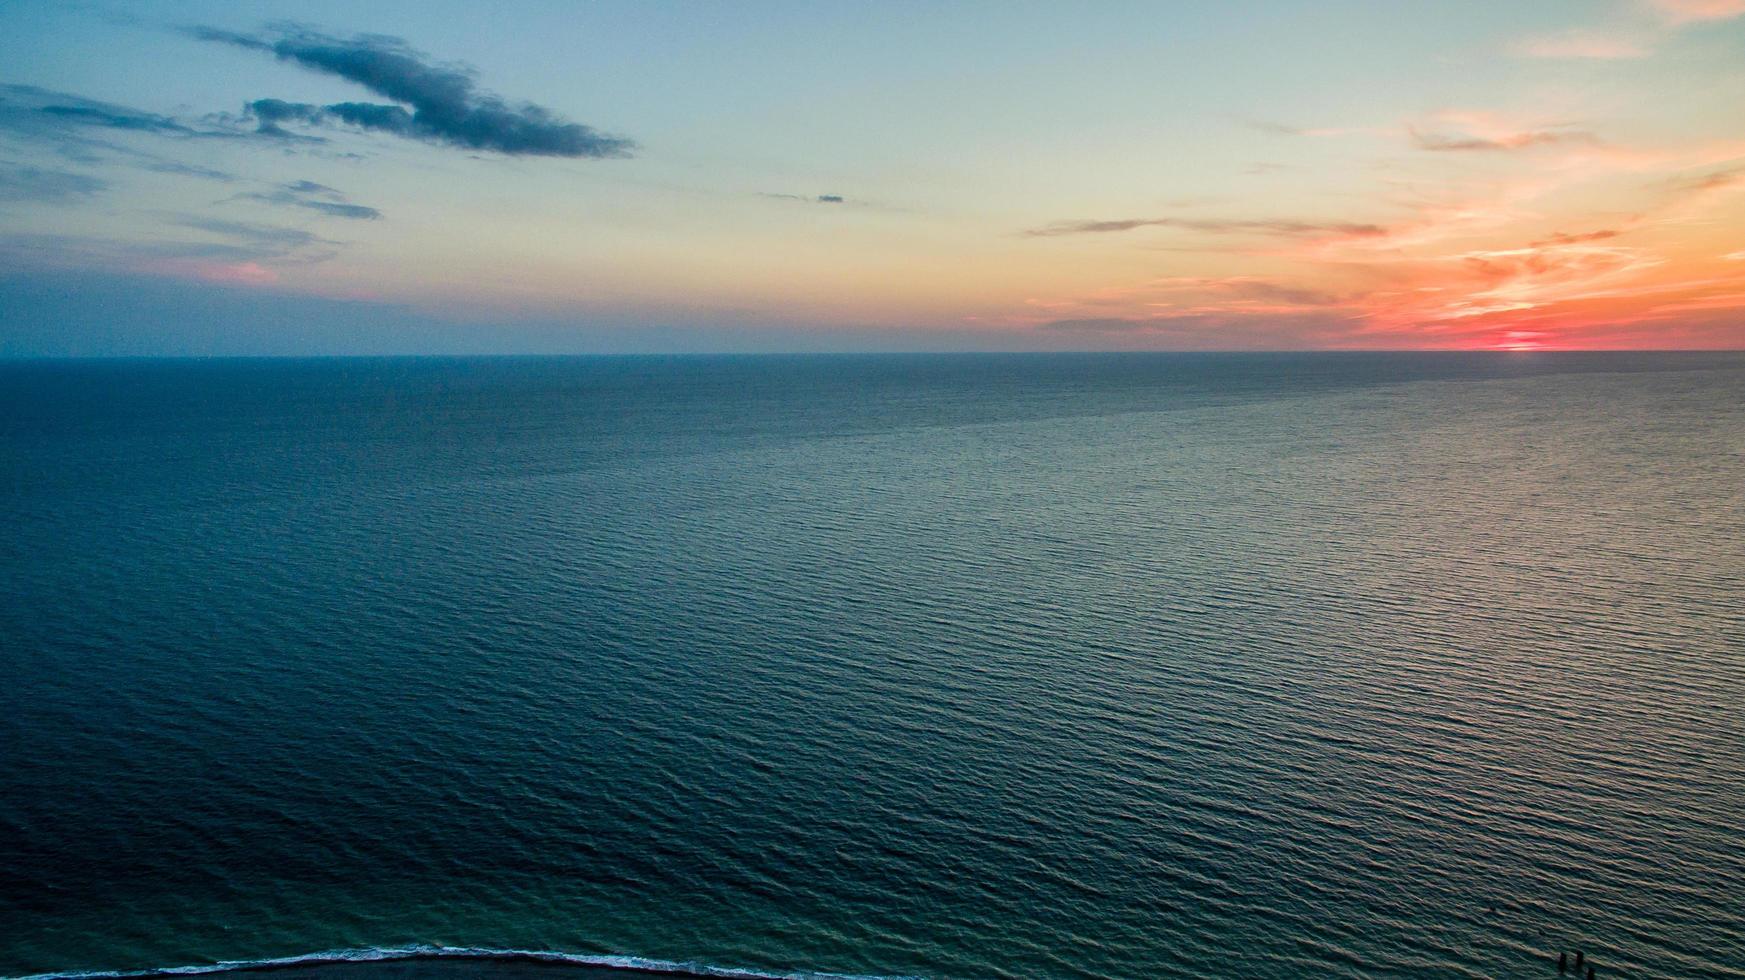 Sunset over a calm sea from the height of bird flight photo